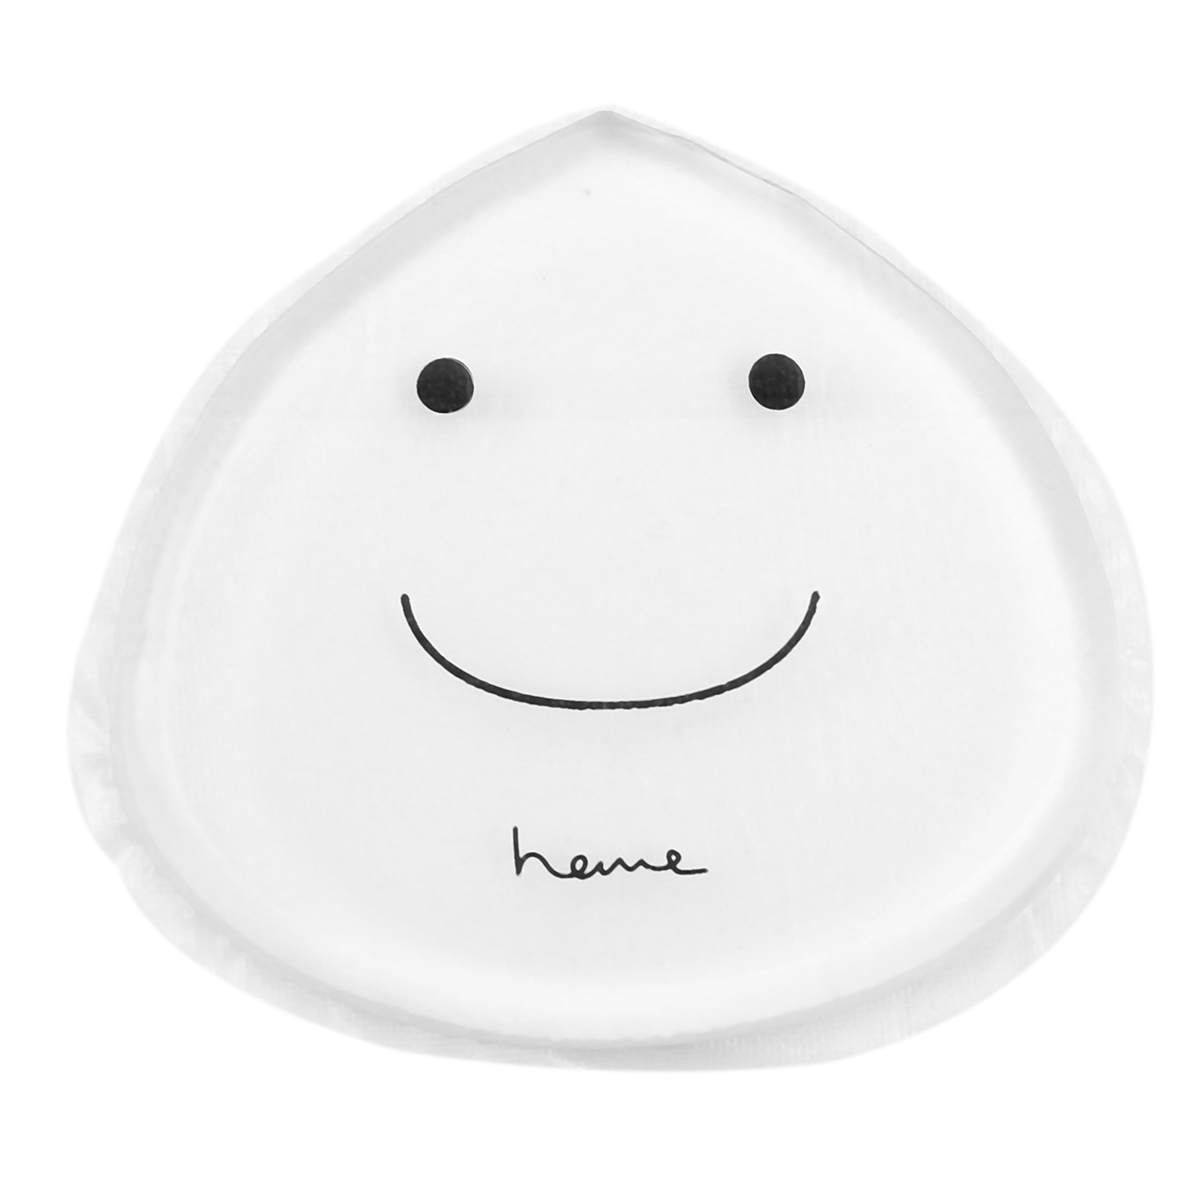 Silicone-Jelly-Transparent-Powder-Squishy-Puff-Smile-Clear-Makeup-Gel-Foundation-Sponge-Cosmetic-Too-1120966